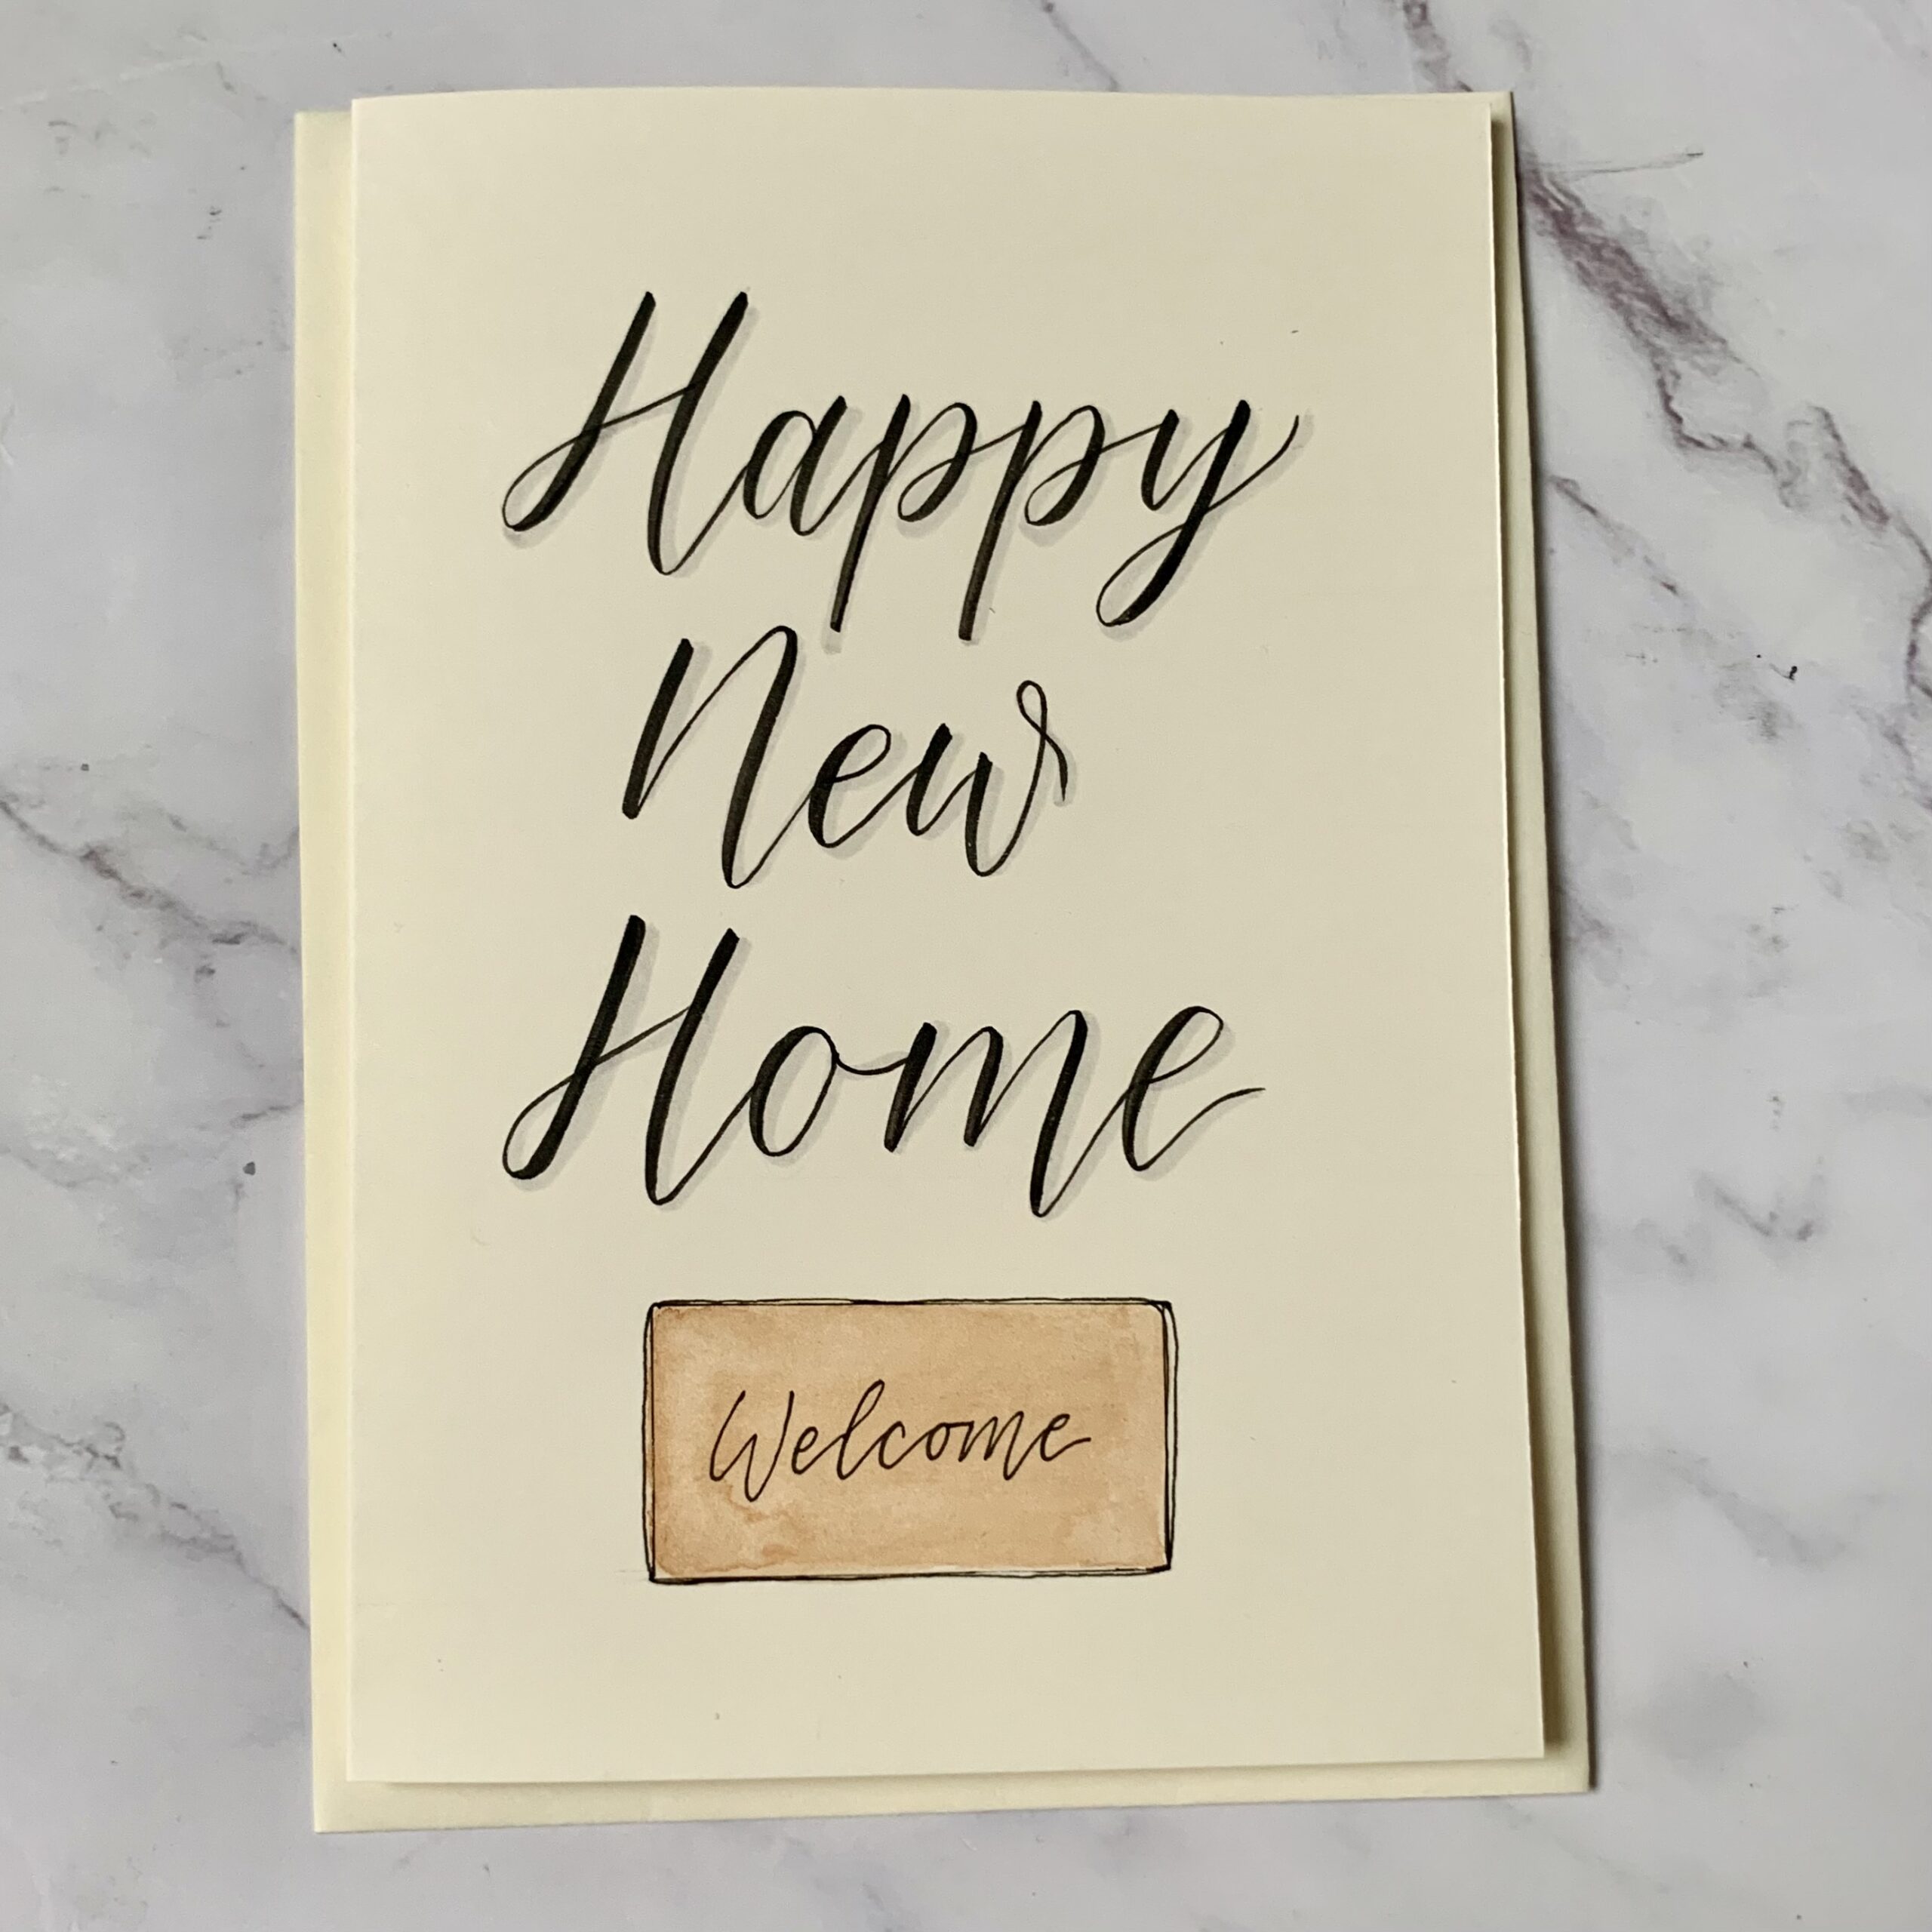 Greeting card - Welcome mat